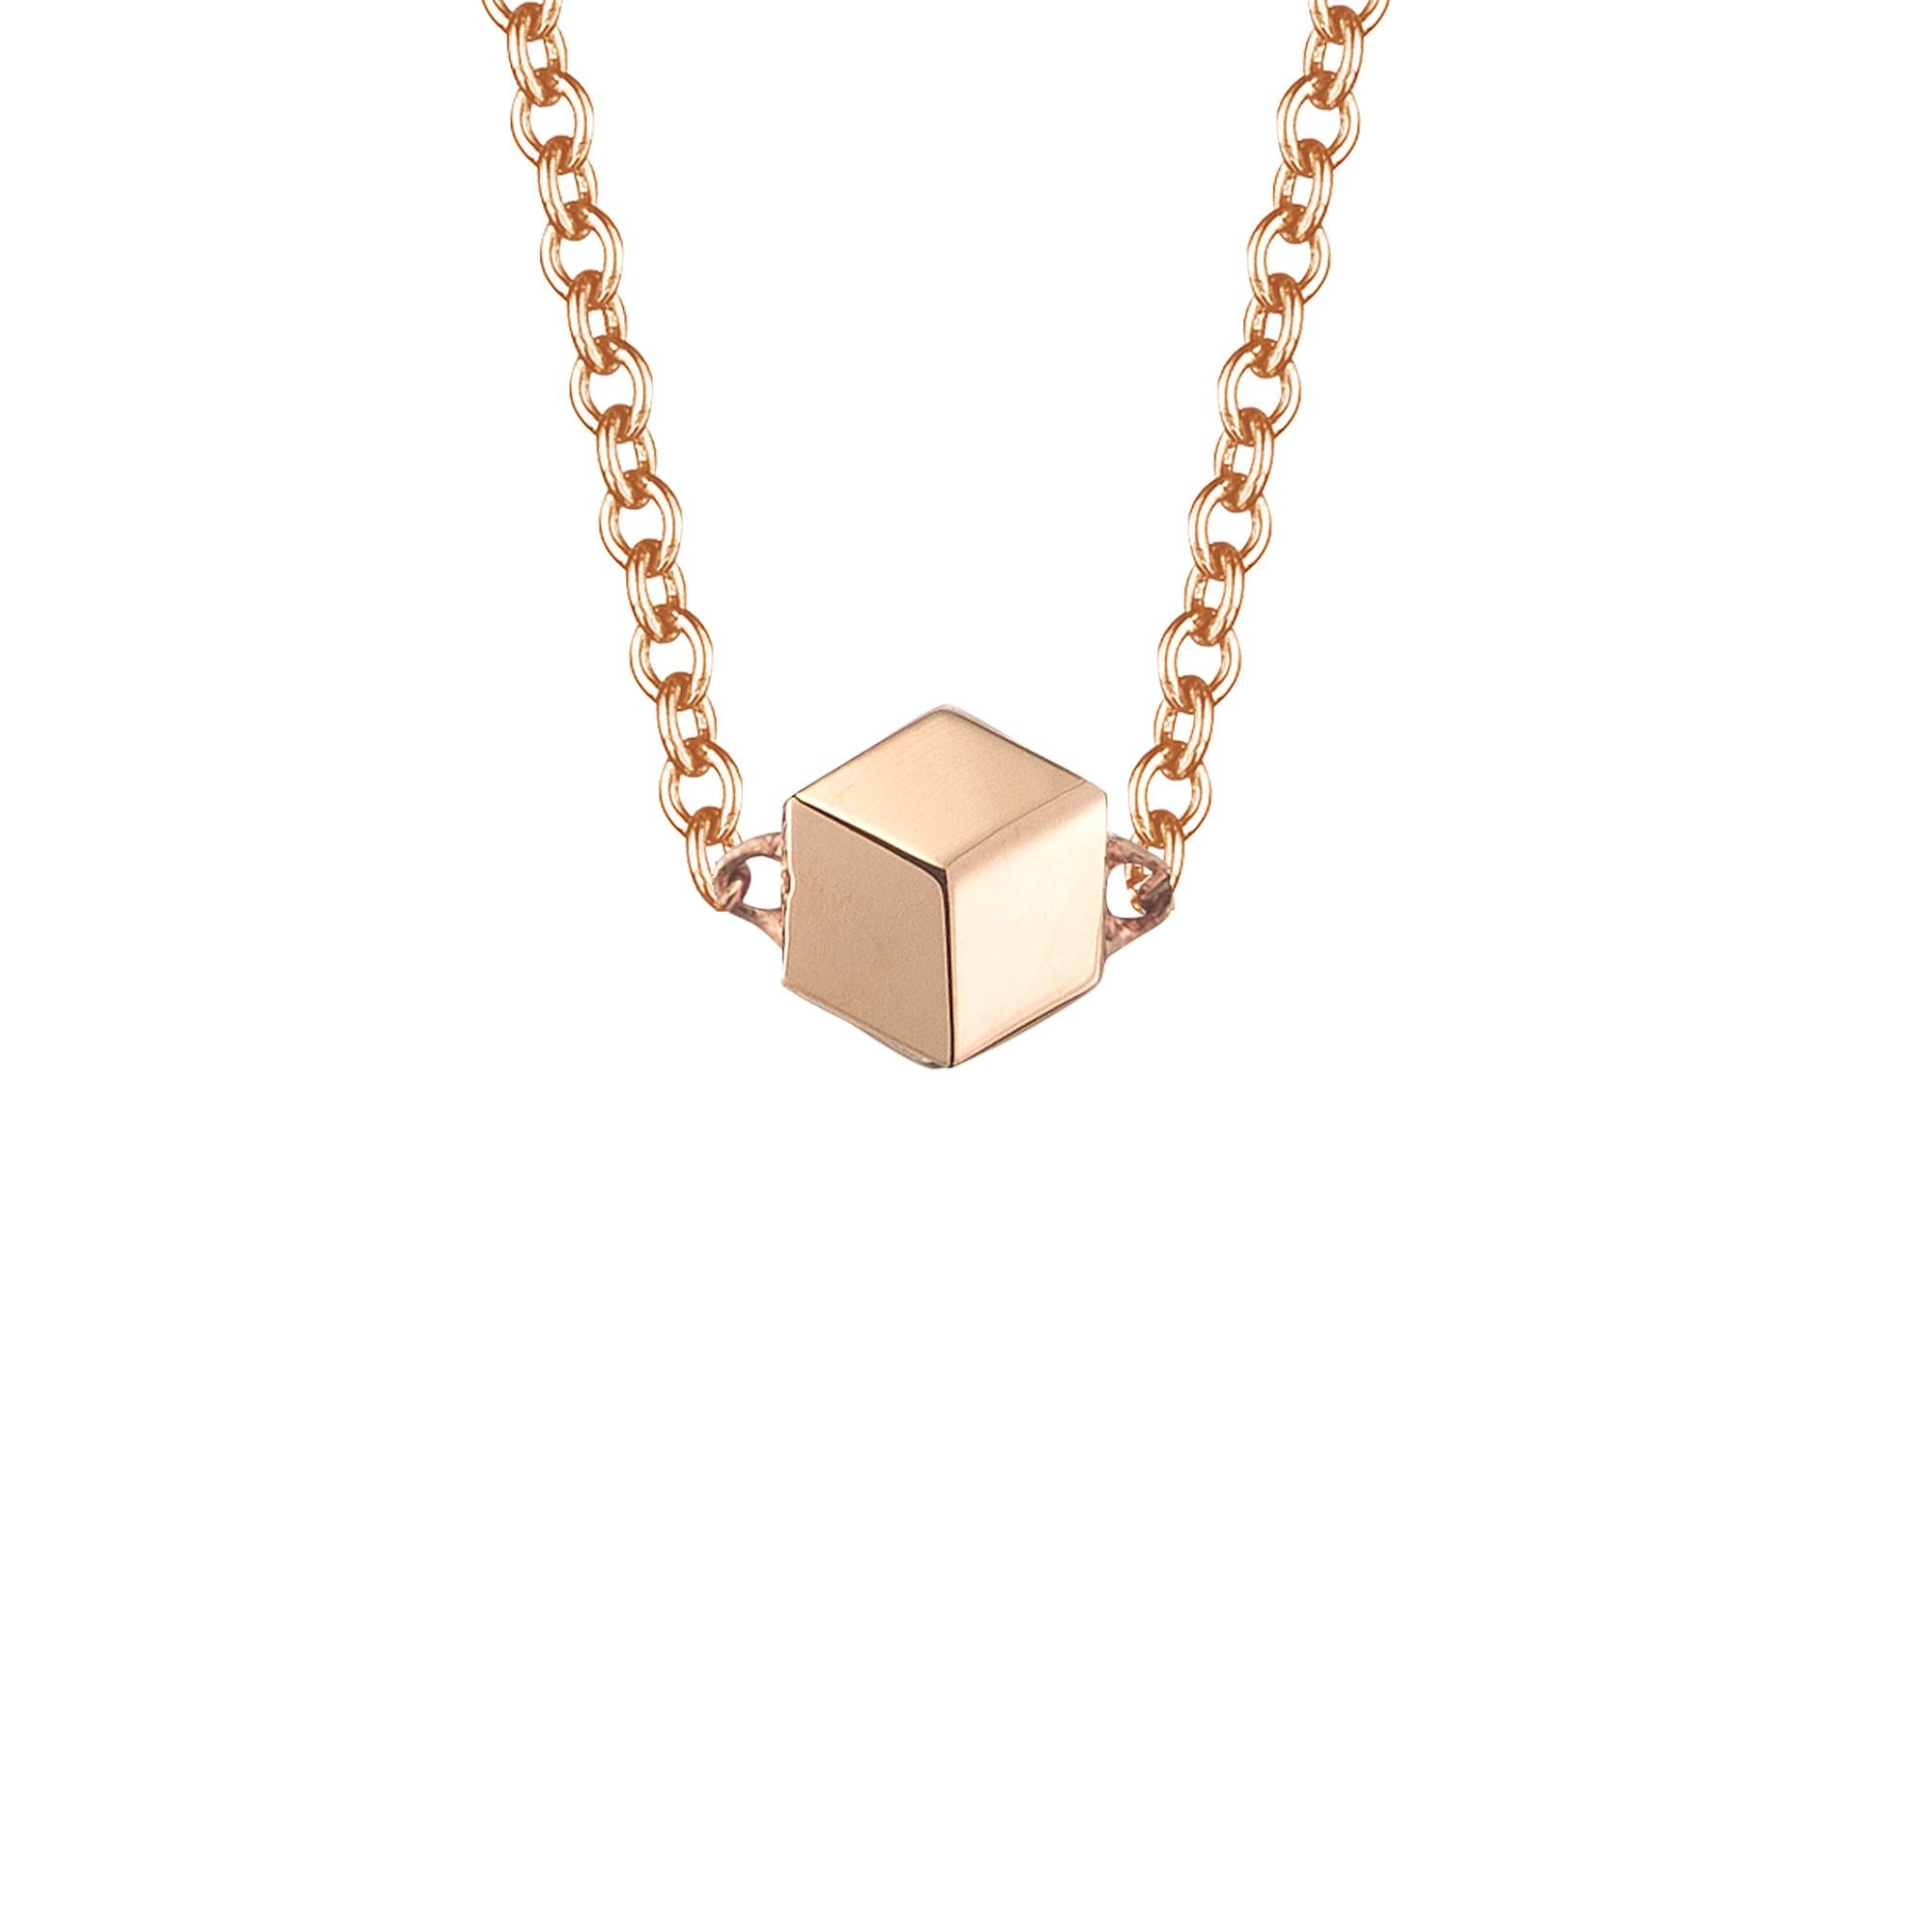 High polish 18kt rose gold Brillante® pendant necklace.

Incredibly detailed despite its size, the Natalie pendant is impressive even at a distance. This delicate 18kt rose gold necklace can be adjusted to different lengths, lending to its